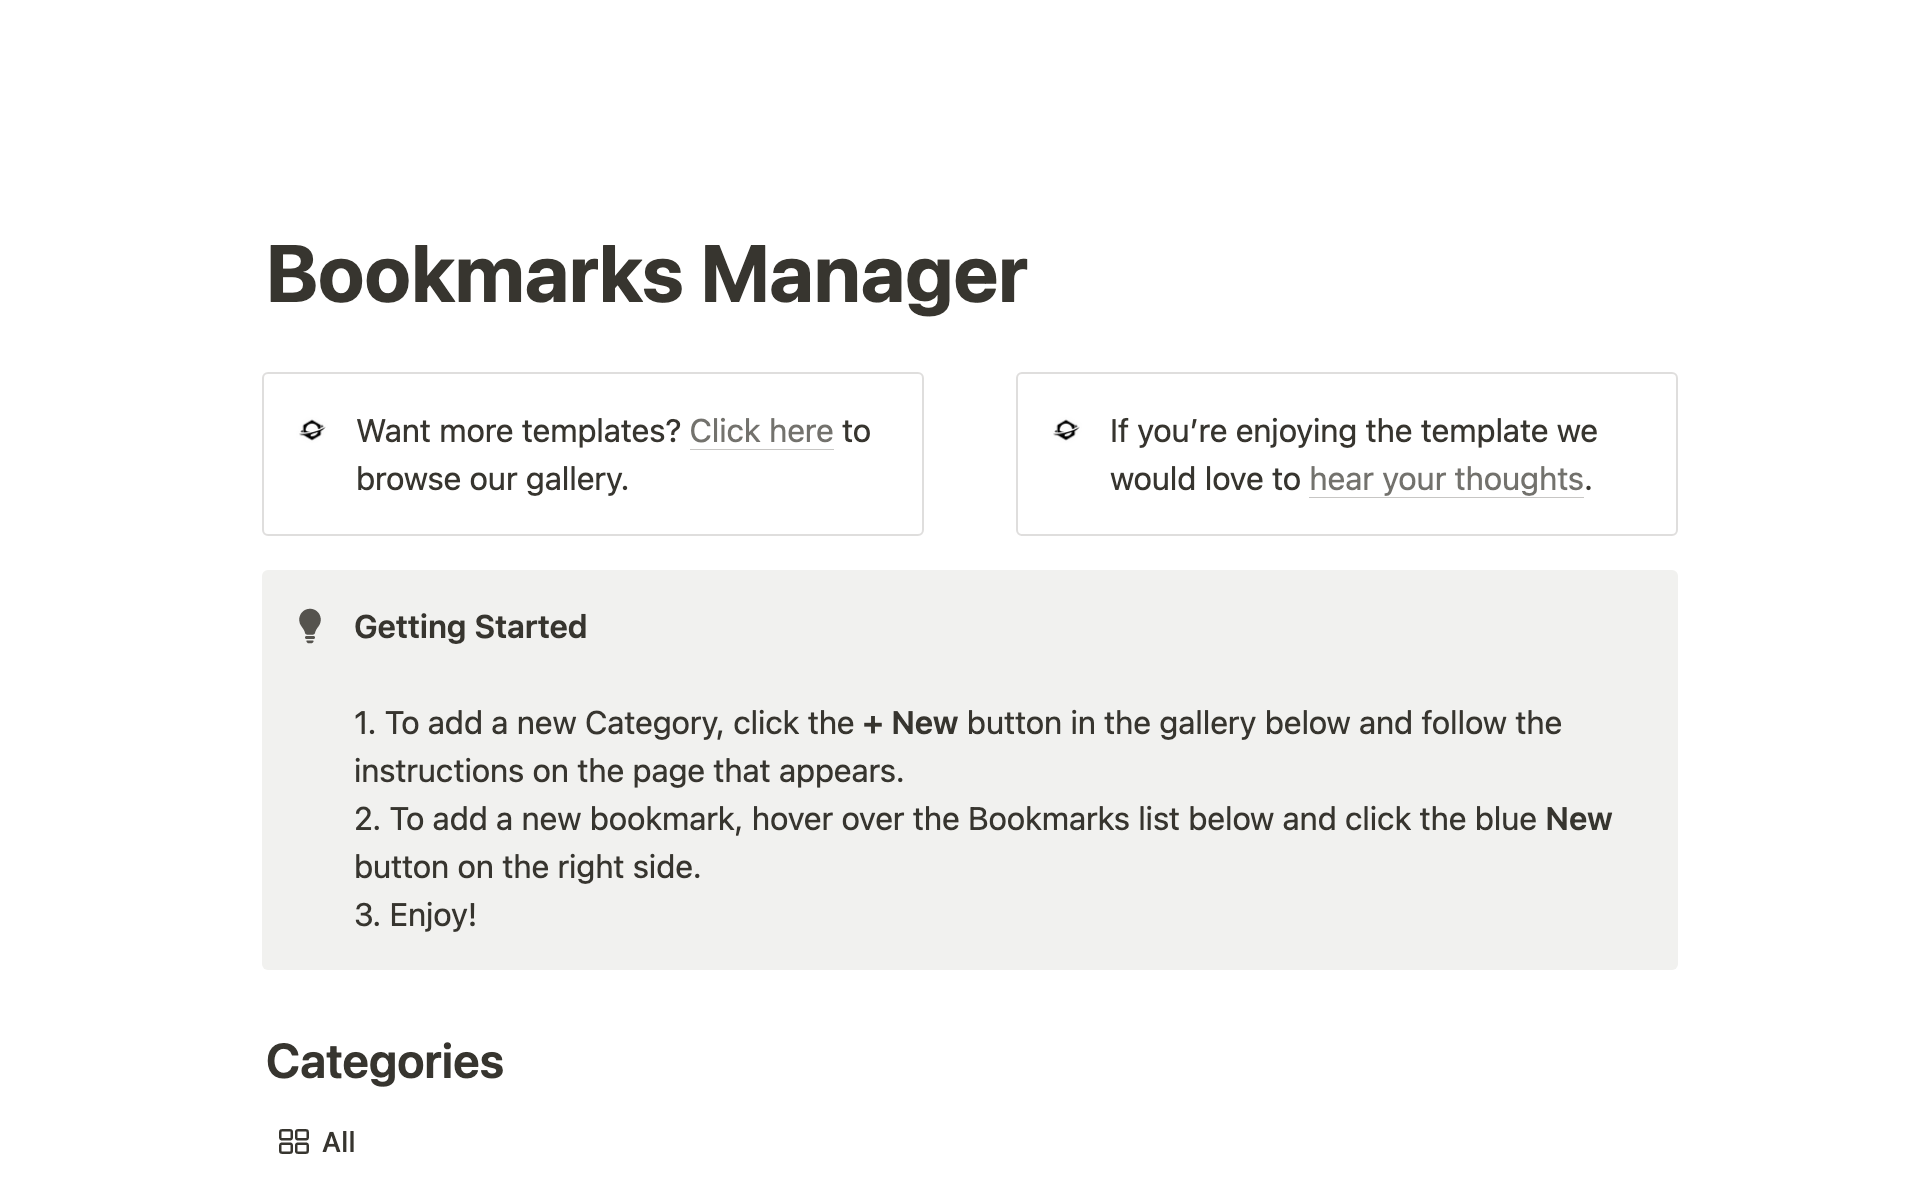 Save and organize your bookmarks with Notion.